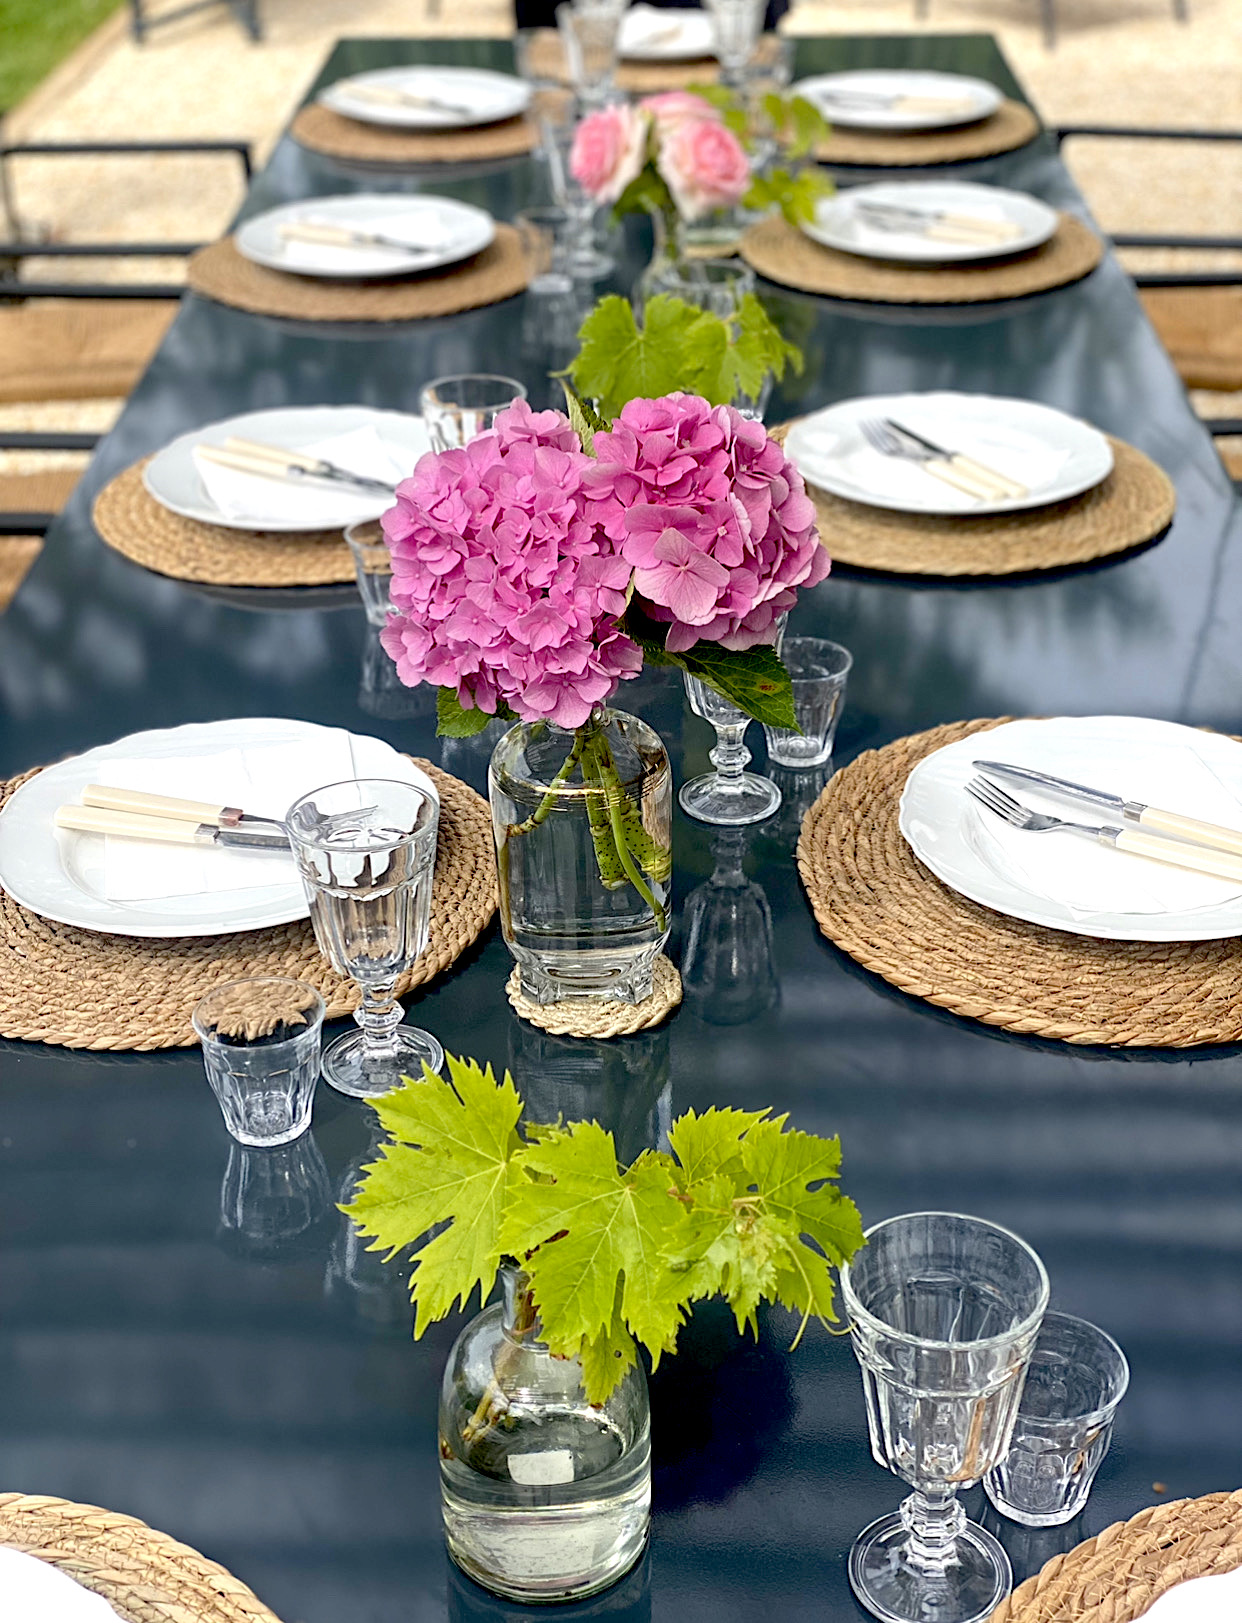 Table setting of Pergola with flowers and grapevines